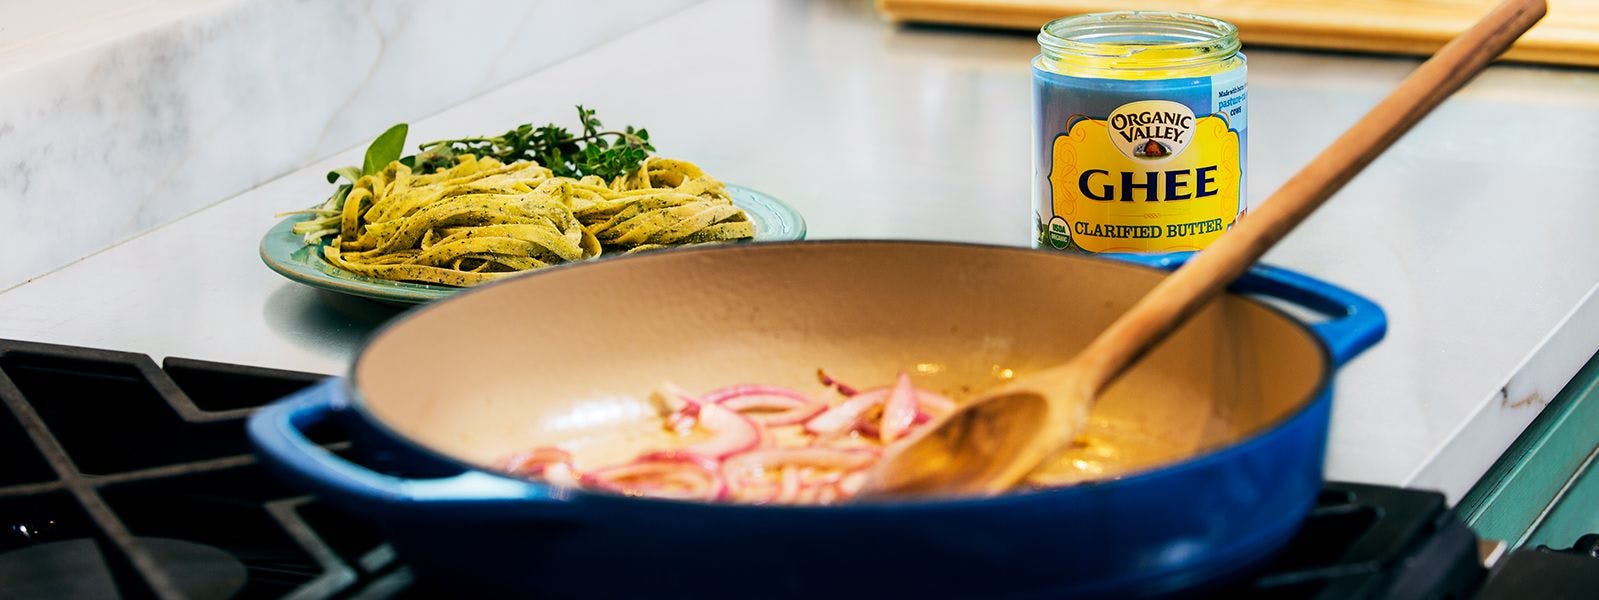 Cooking with Organic Valley Ghee